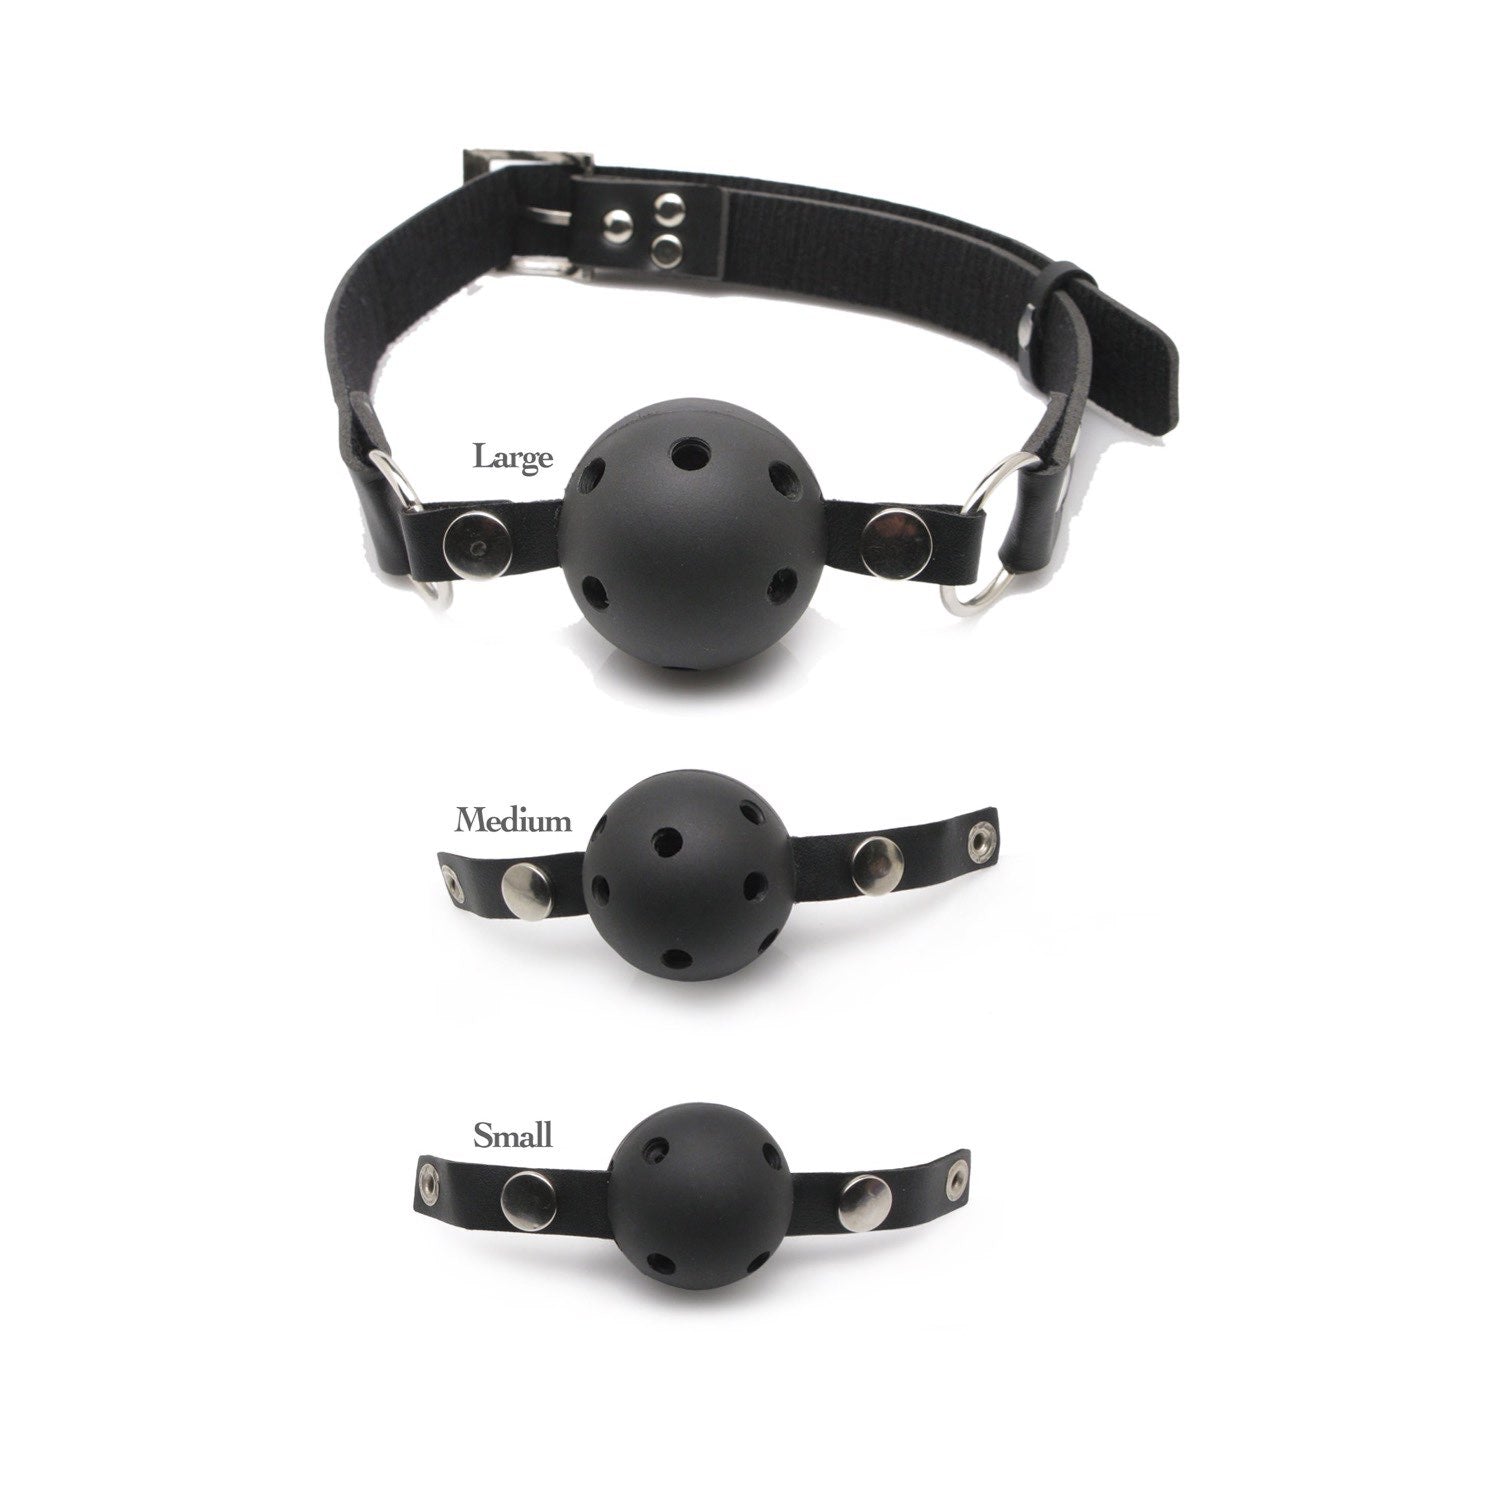 Fetish Fantasy Series Ball Gag Training System - Interchangeable Breathable Ball Gags by Pipedream